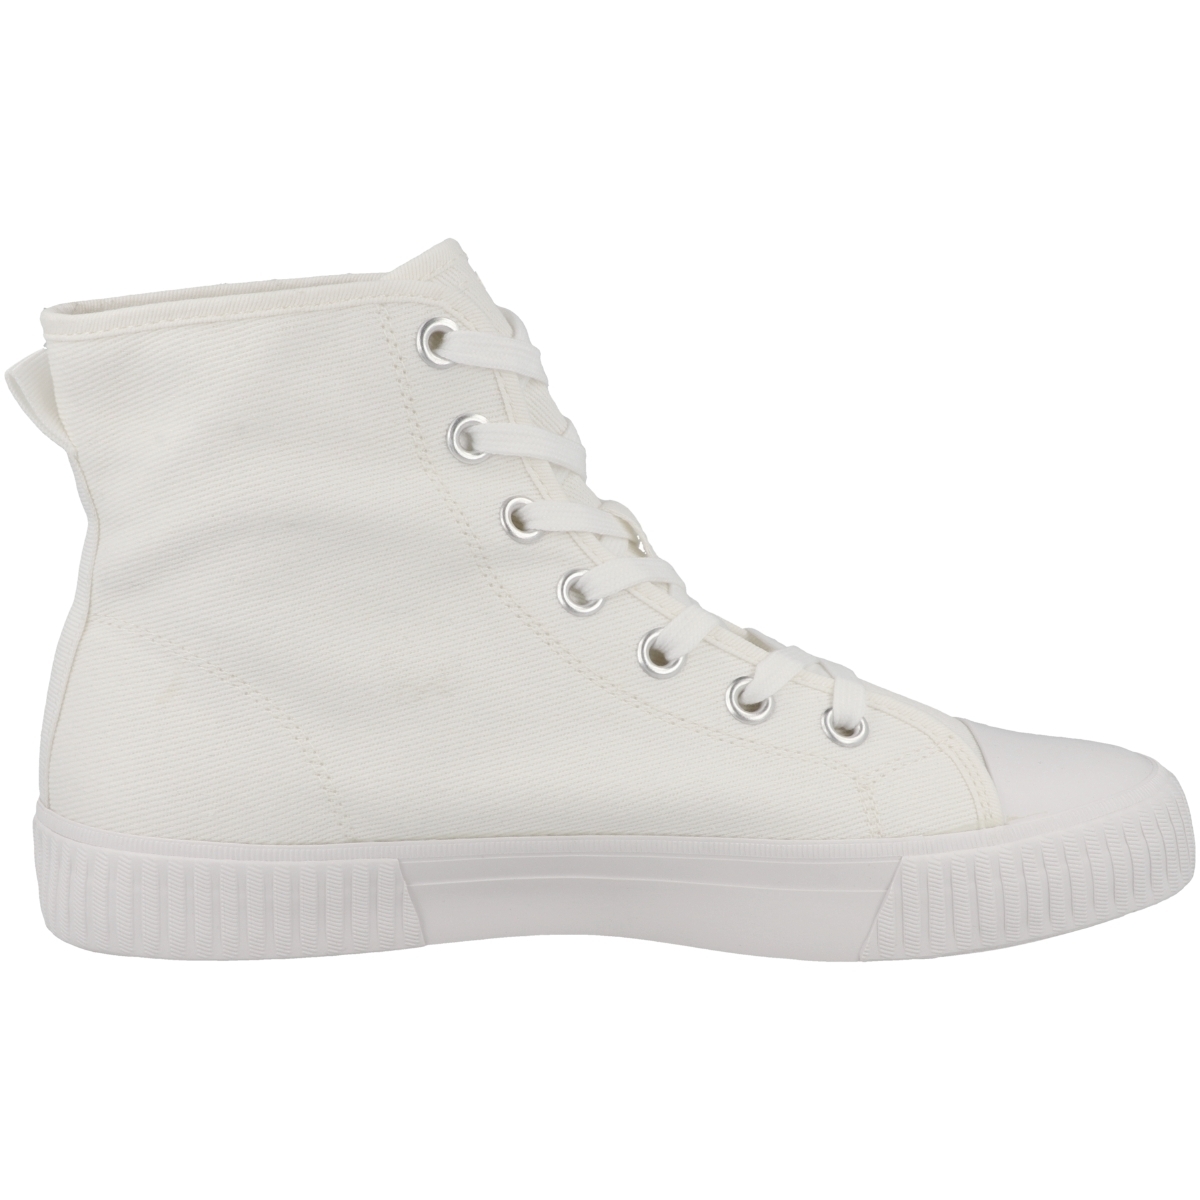 s.Oliver 5-15202-28 Sneaker weiss